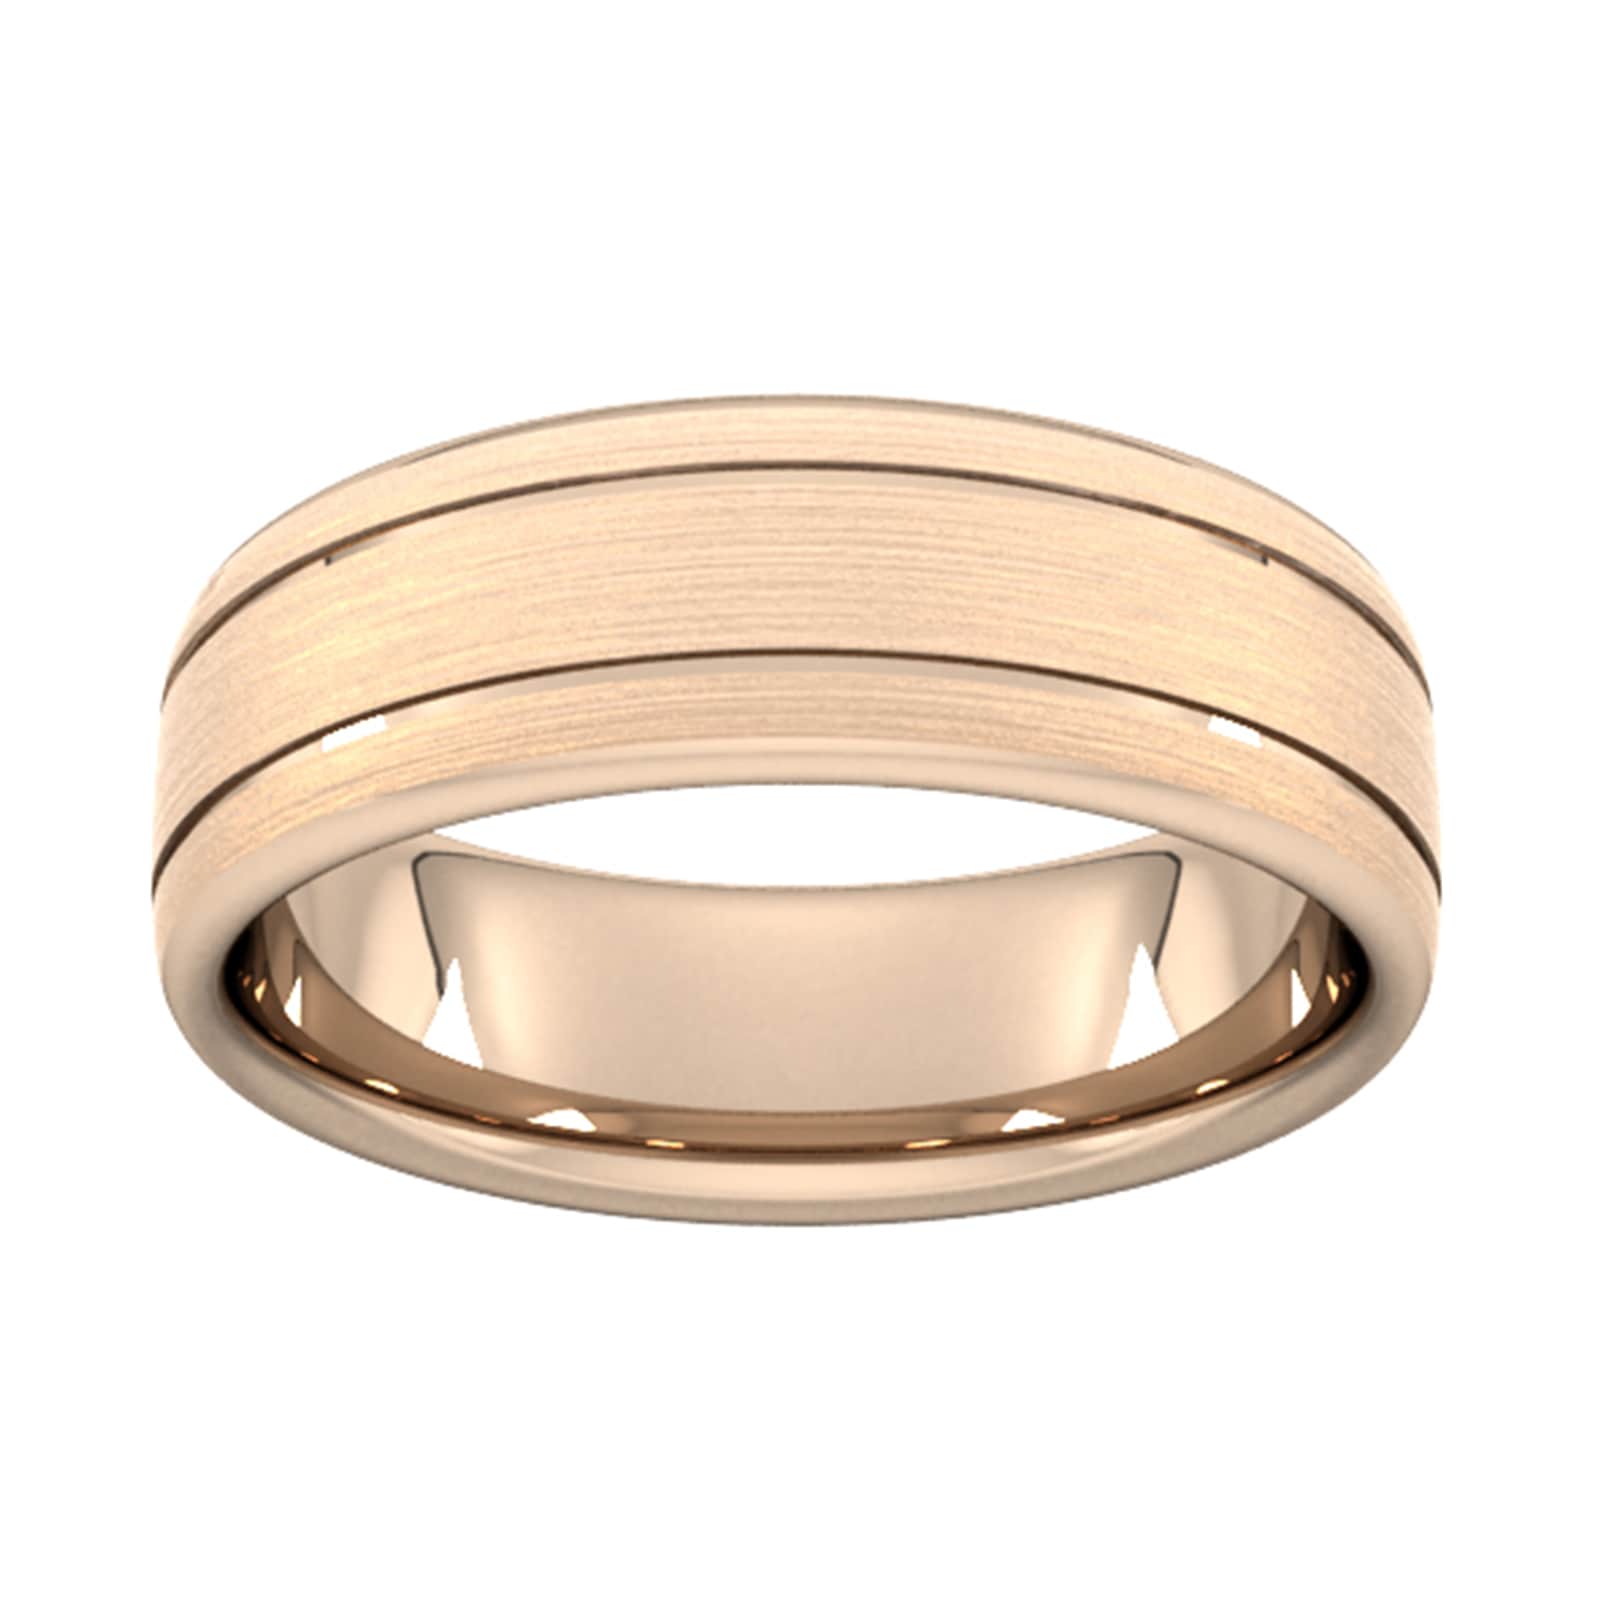 7mm Slight Court Heavy Matt Finish With Double Grooves Wedding Ring In 9 Carat Rose Gold - Ring Size Q